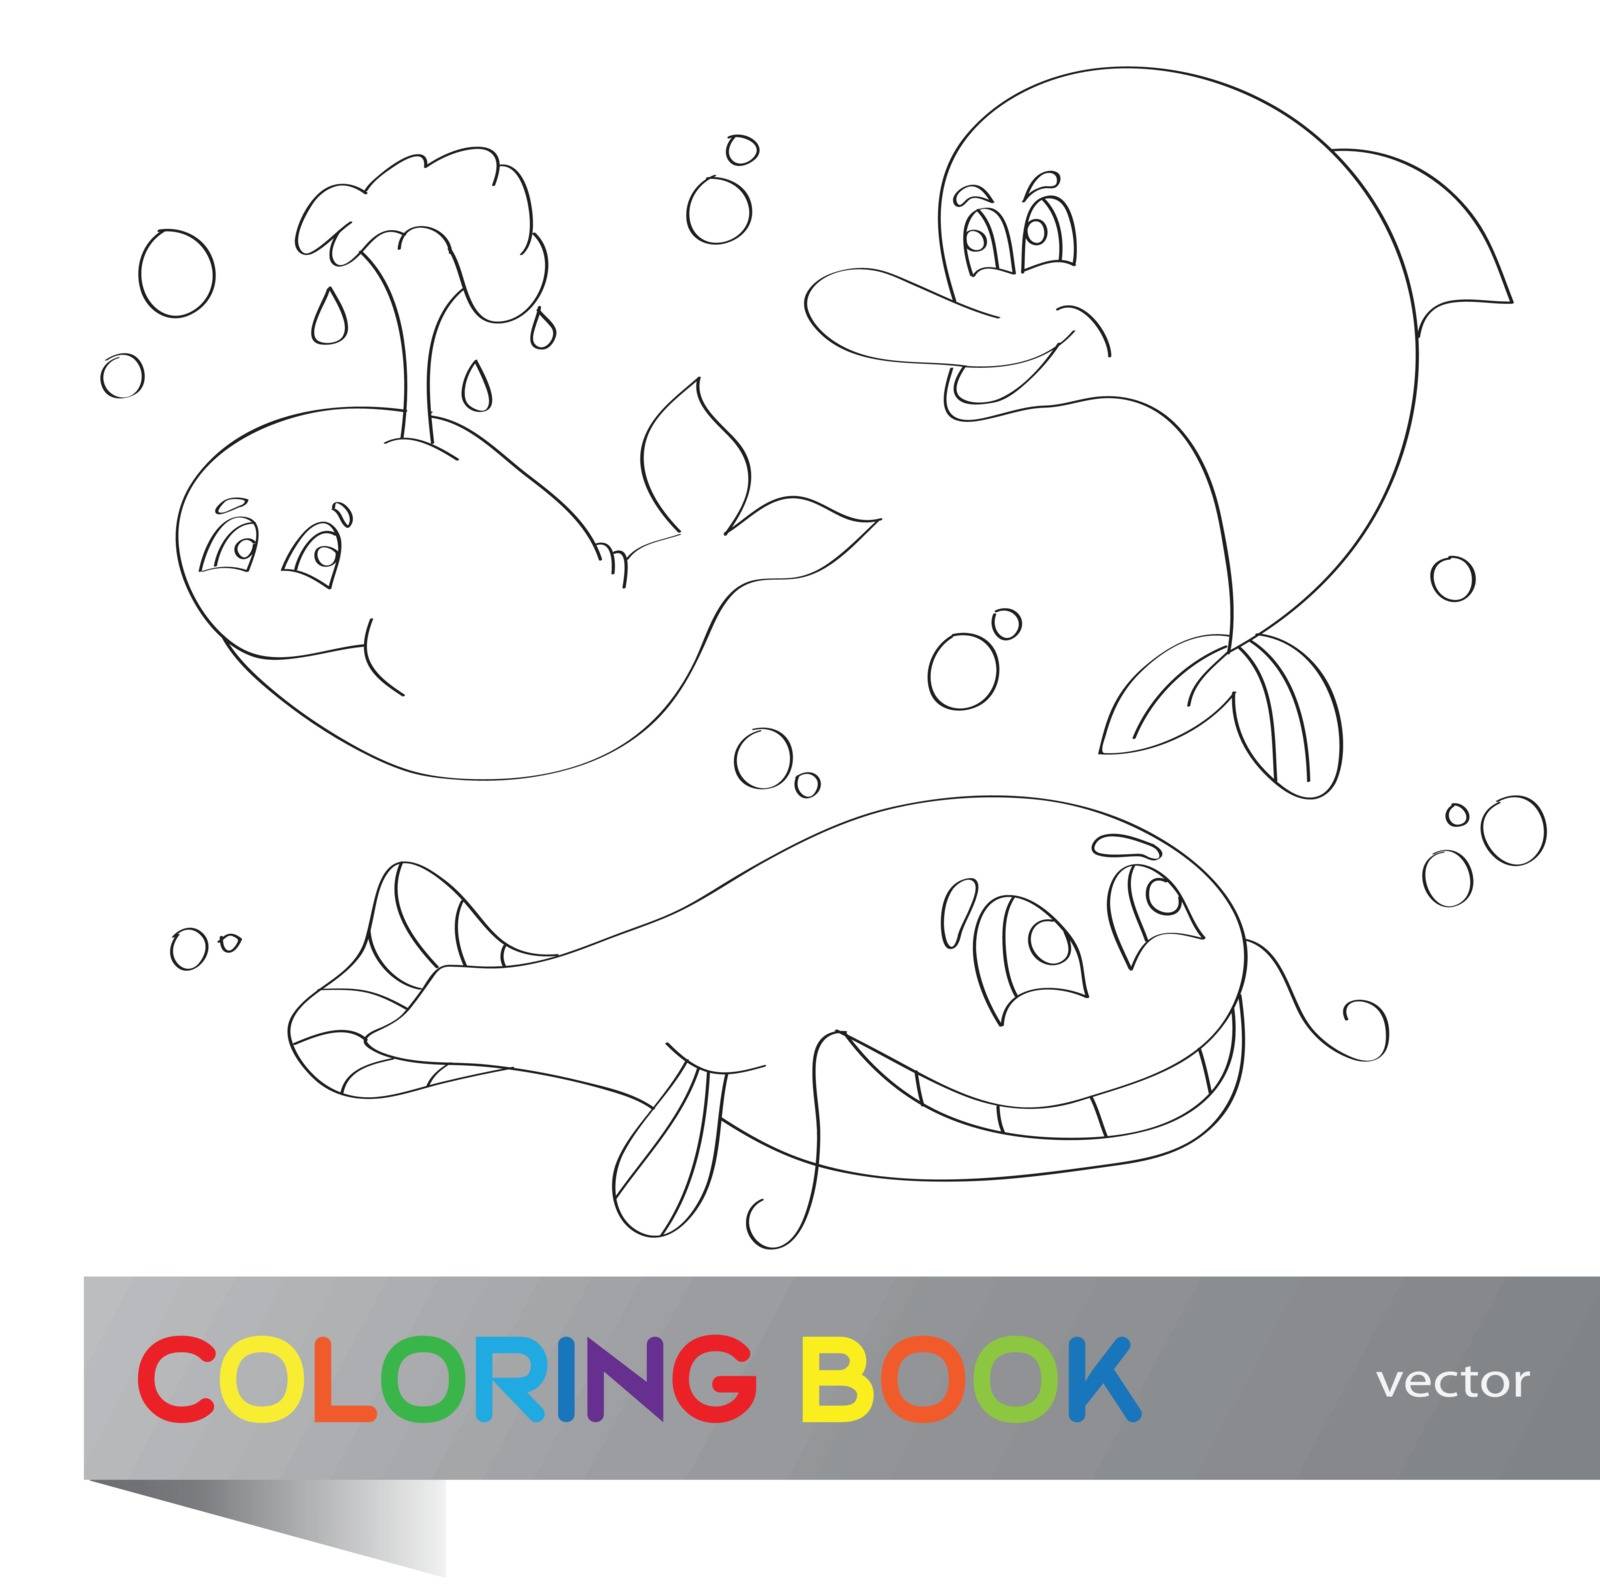 Coloring book - set of images of the marine life